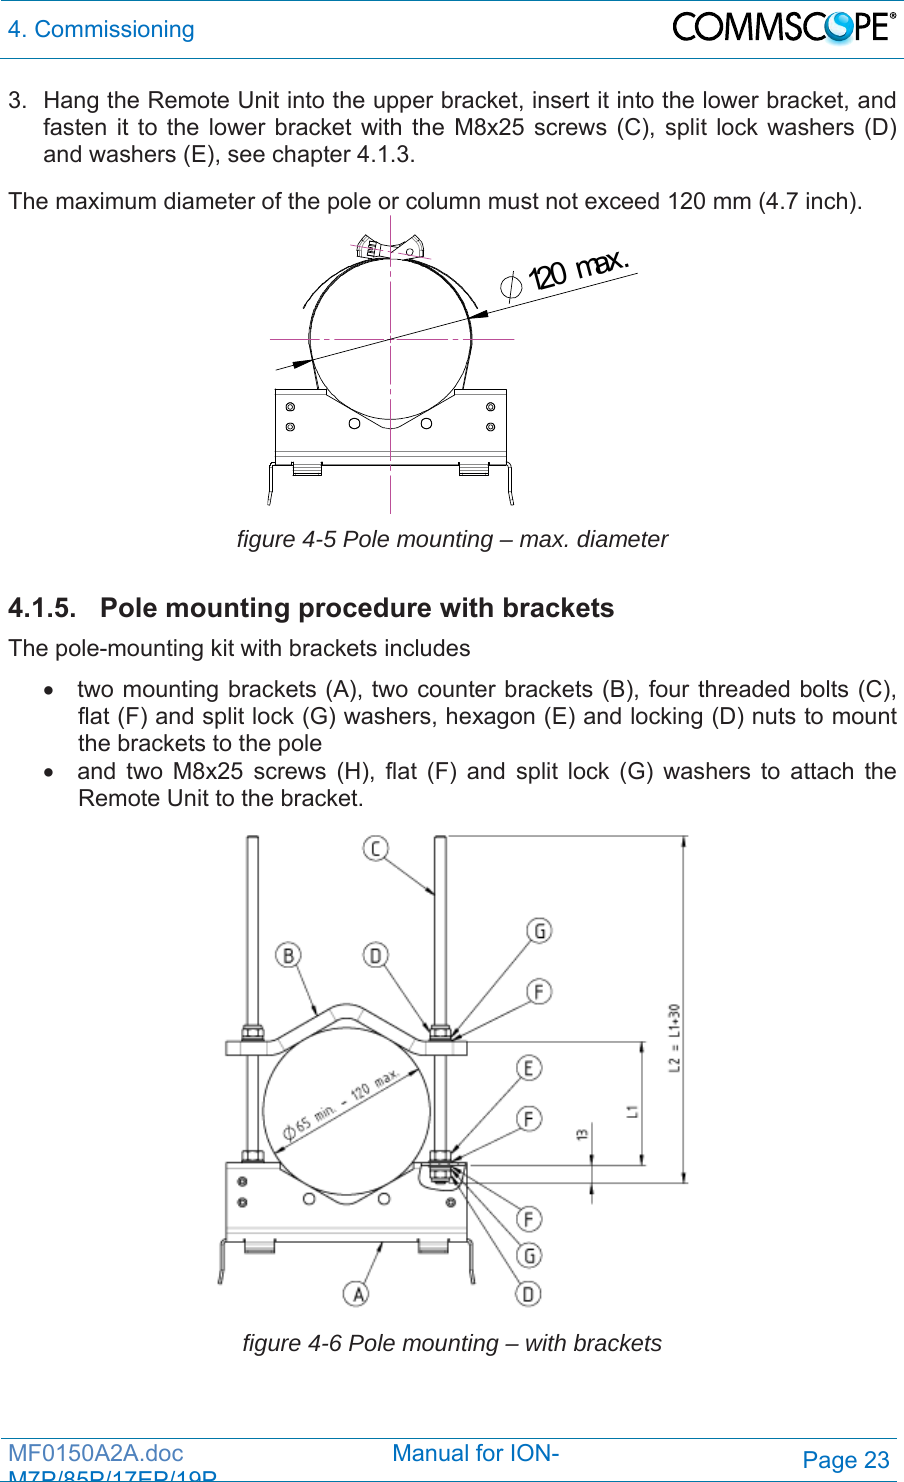 4. Commissioning  MF0150A2A.doc                                Manual for ION-M7P/85P/17EP/19PPage 23 3.  Hang the Remote Unit into the upper bracket, insert it into the lower bracket, and fasten it to the lower bracket with the M8x25 screws (C), split lock washers (D) and washers (E), see chapter 4.1.3.  The maximum diameter of the pole or column must not exceed 120 mm (4.7 inch). 120max. figure 4-5 Pole mounting – max. diameter  4.1.5.  Pole mounting procedure with brackets The pole-mounting kit with brackets includes   two mounting brackets (A), two counter brackets (B), four threaded bolts (C), flat (F) and split lock (G) washers, hexagon (E) and locking (D) nuts to mount the brackets to the pole   and two M8x25 screws (H), flat (F) and split lock (G) washers to attach the Remote Unit to the bracket.  figure 4-6 Pole mounting – with brackets  